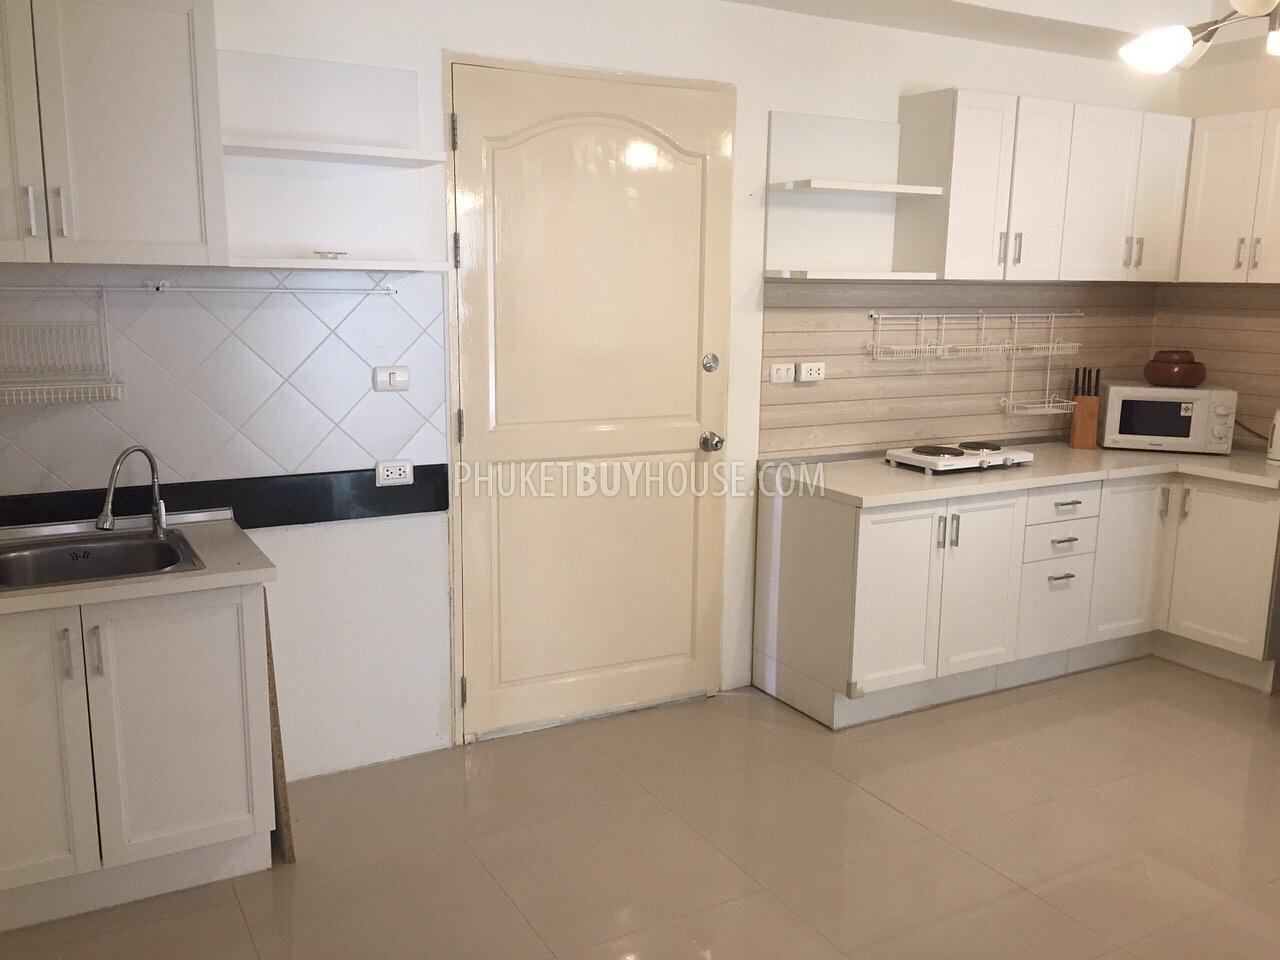 PAT5118: One bedroom apartment in the heart of Patong. Фото #4